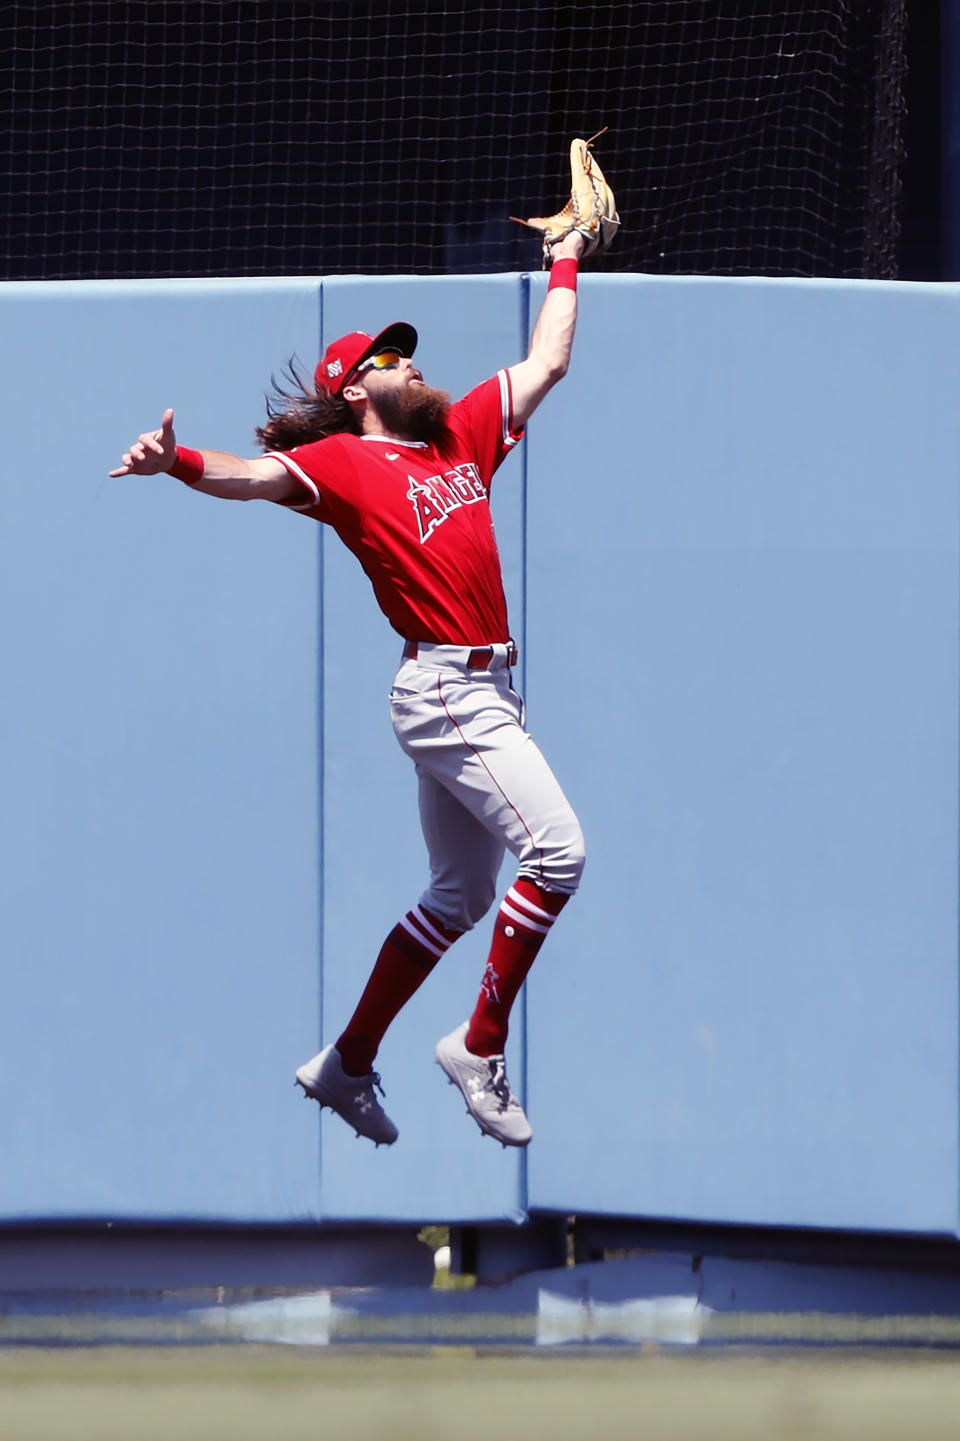 Los Angeles Angels center fielder Brandon Marsh leaps to catch a fly ball hit by Los Angeles Dodgers' Max Muncy during the second inning of a baseball game in Los Angeles, Sunday, Aug. 8, 2021. (AP Photo/Alex Gallardo)